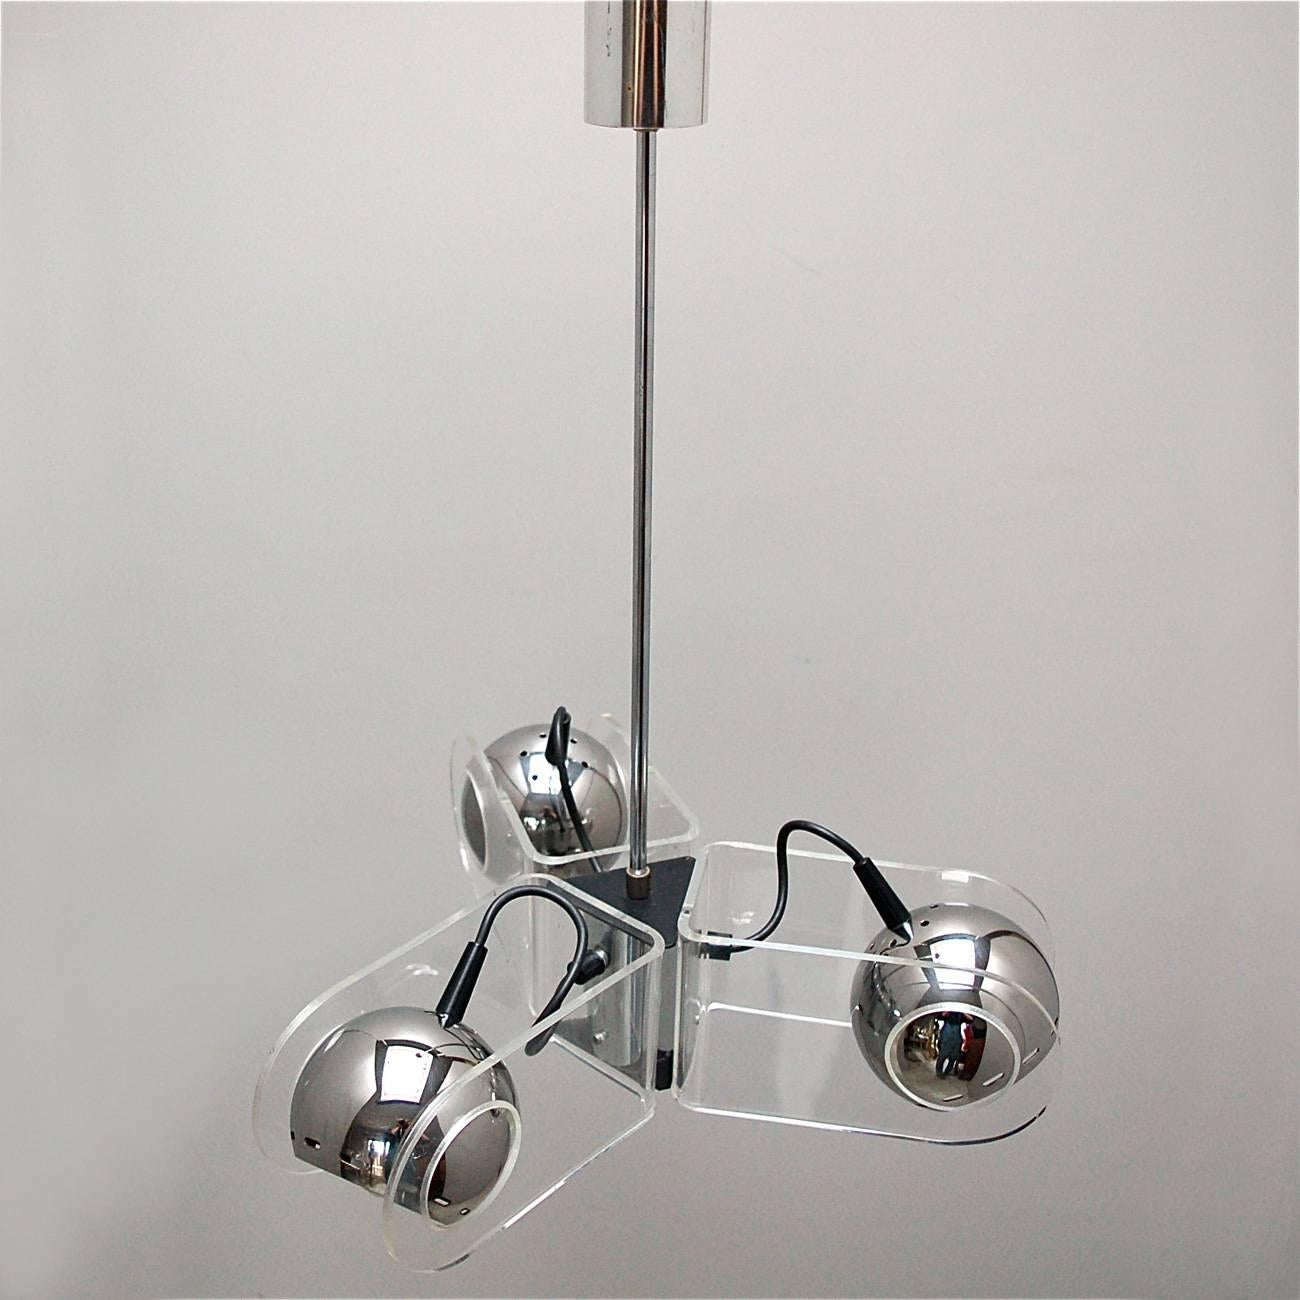 Rare pendant or ceiling light, Model 540, by Italian designer Gino Sarfatti. It dates back from the 1960s and was manufactured by Arteluce. Not only is the design aesthetically pleasing to the eye, it's also very practical as each sphere is